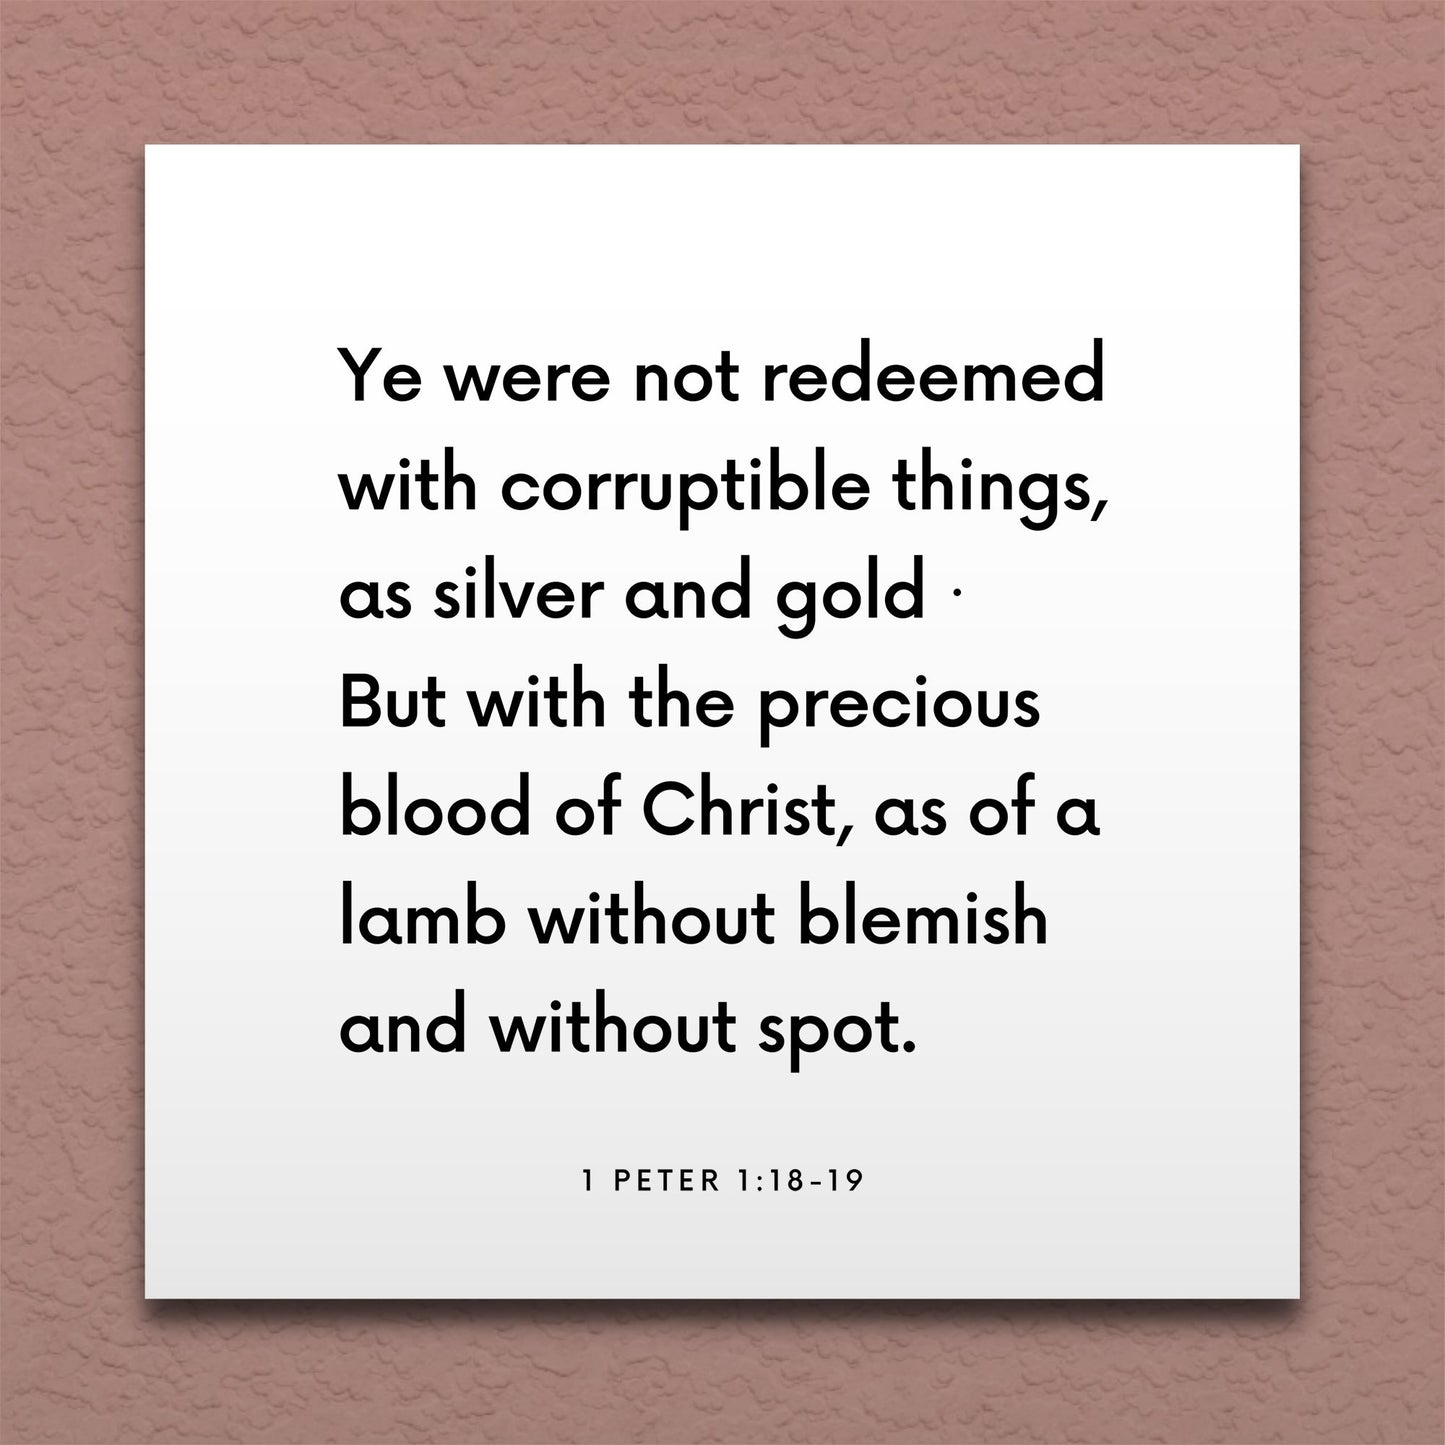 Wall-mounted scripture tile for 1 Peter 1:18-19 - "Ye were not redeemed with corruptible things"